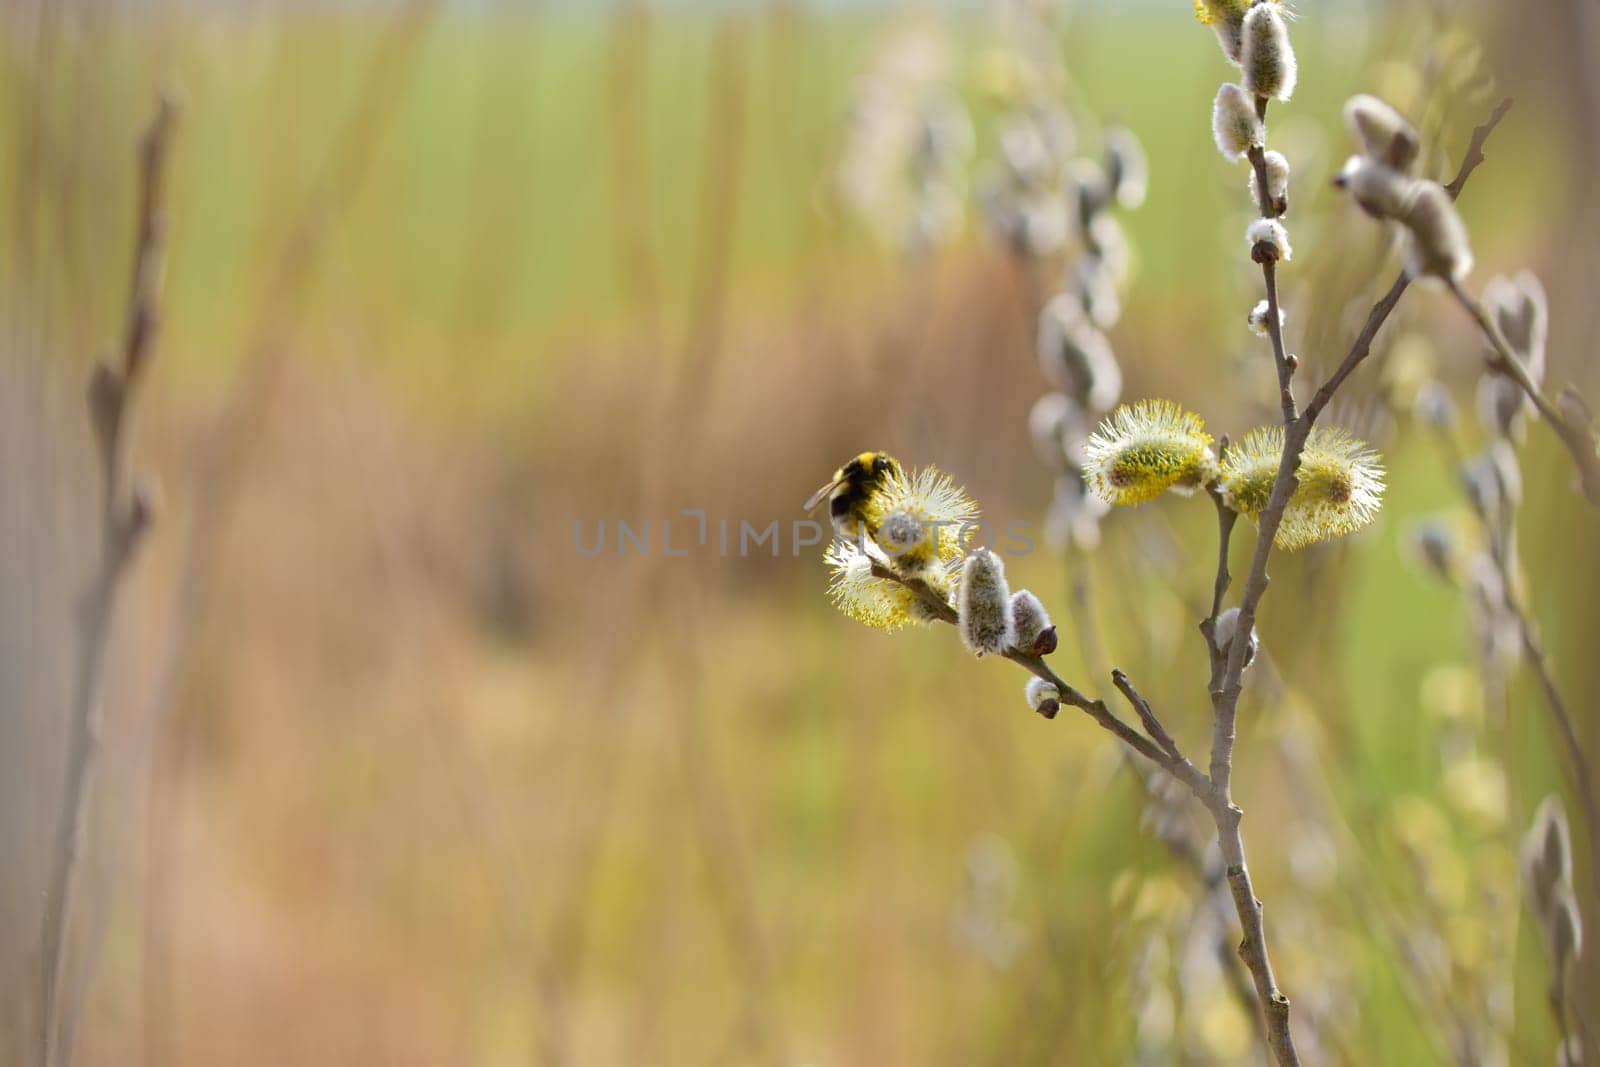 A Bee on a flowering salix against a blurry background